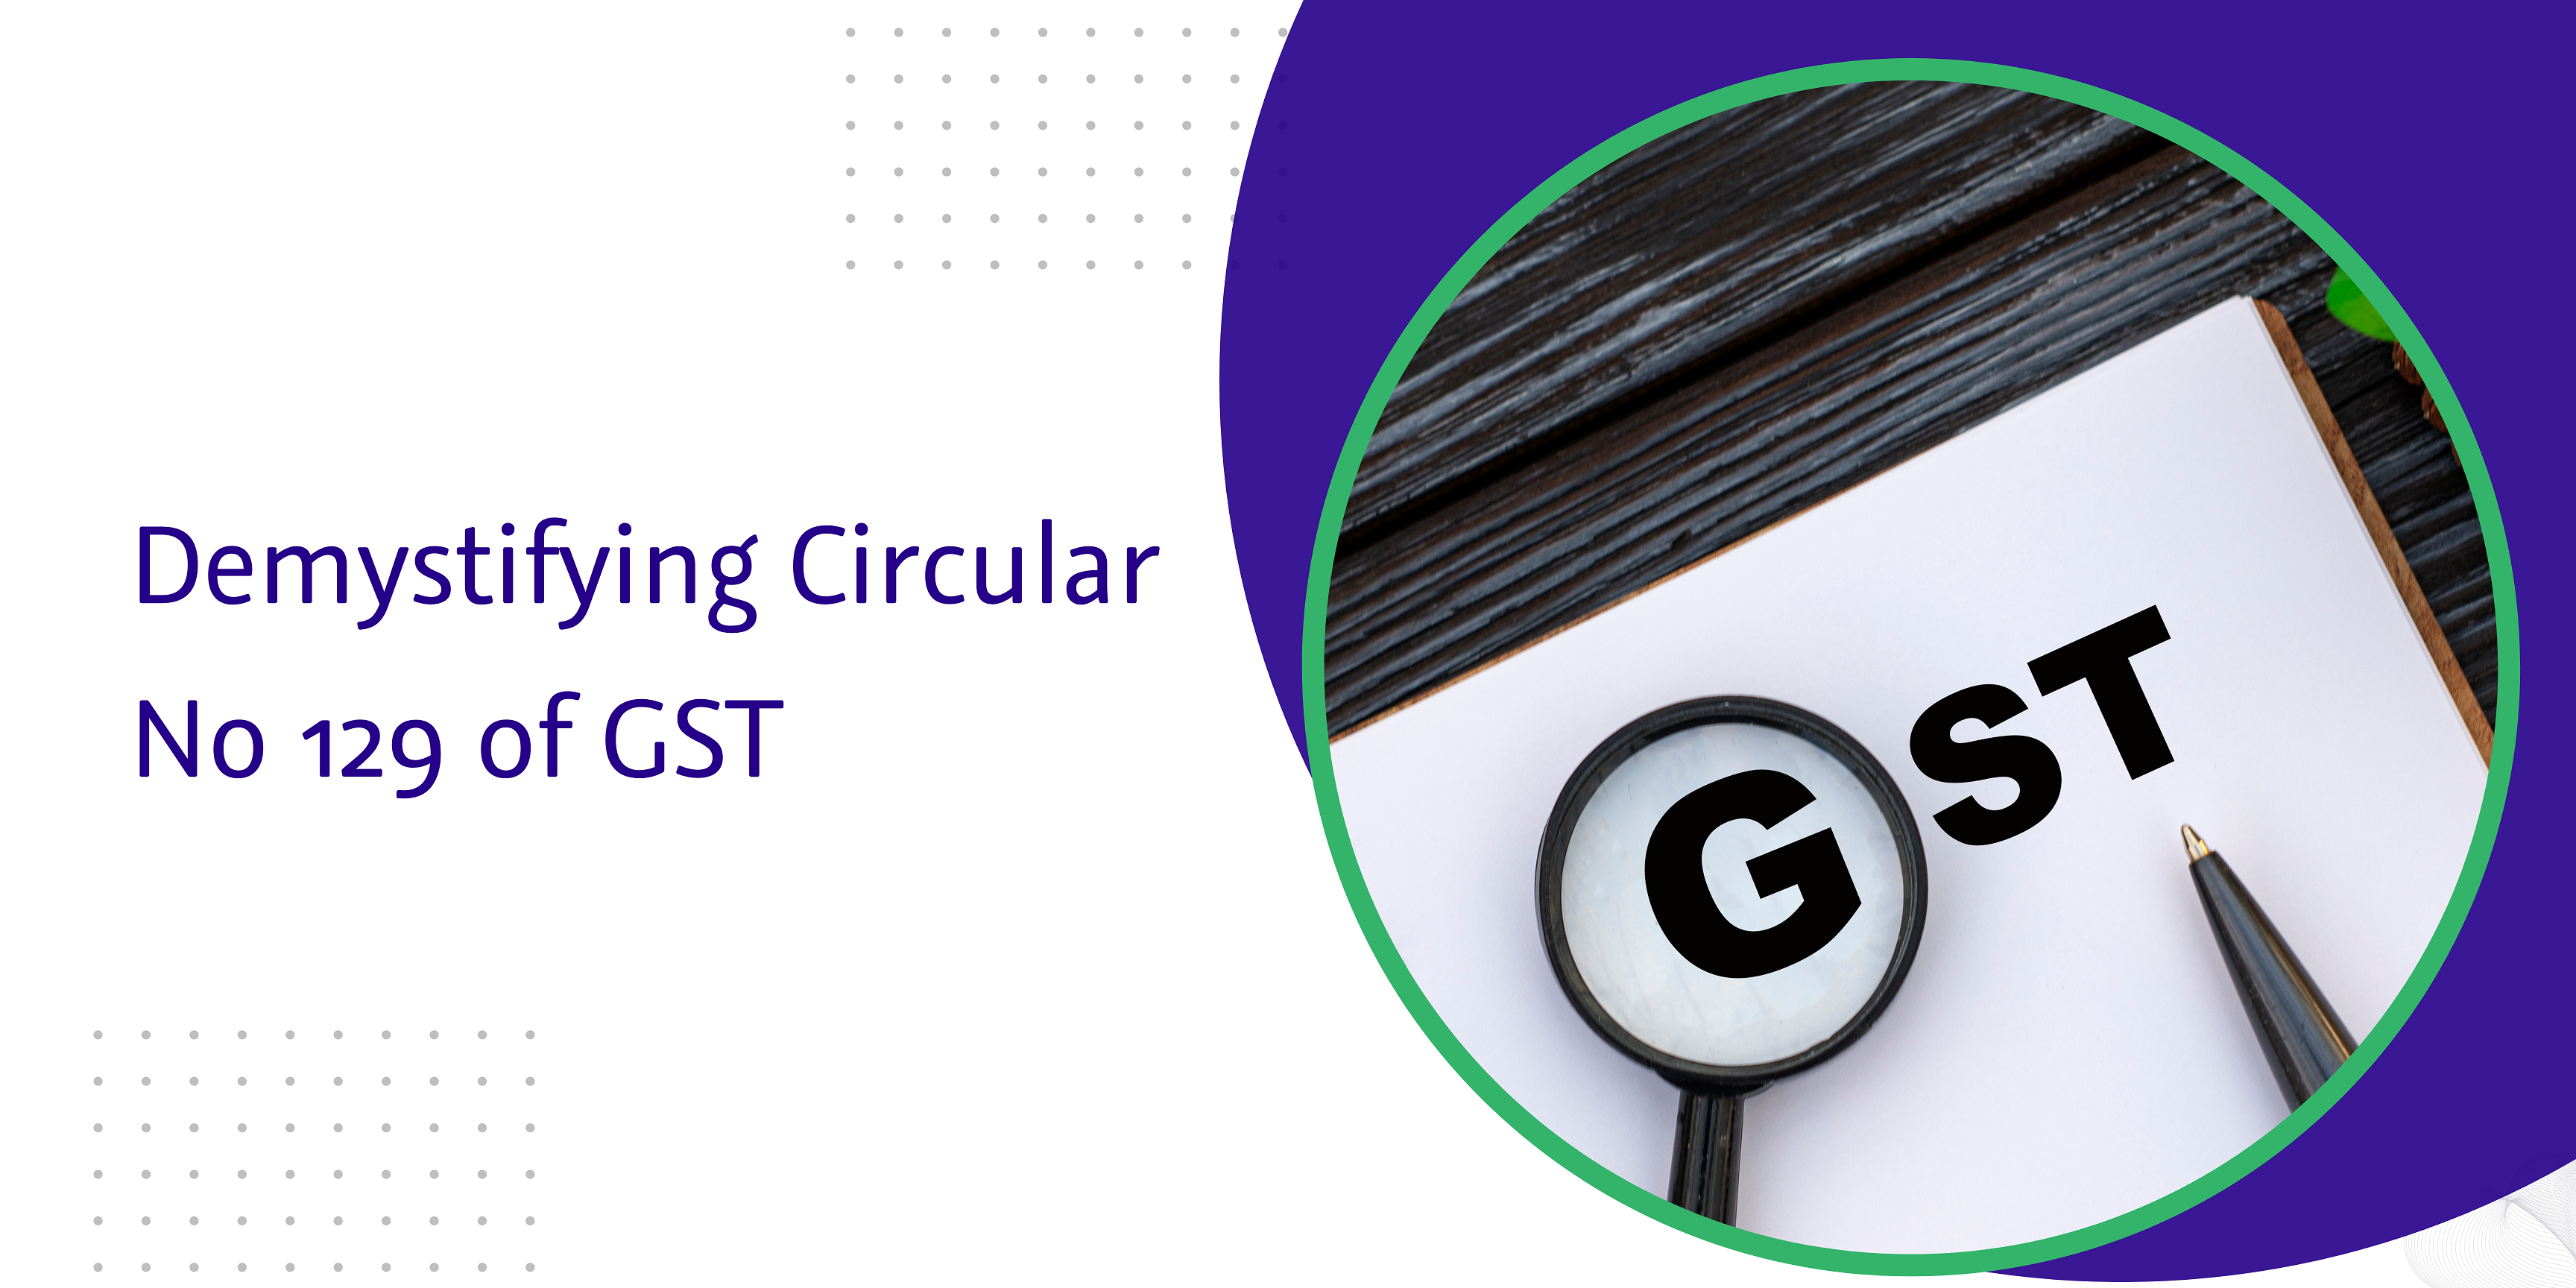 You are currently viewing Demystifying Circular No. 129 of GST